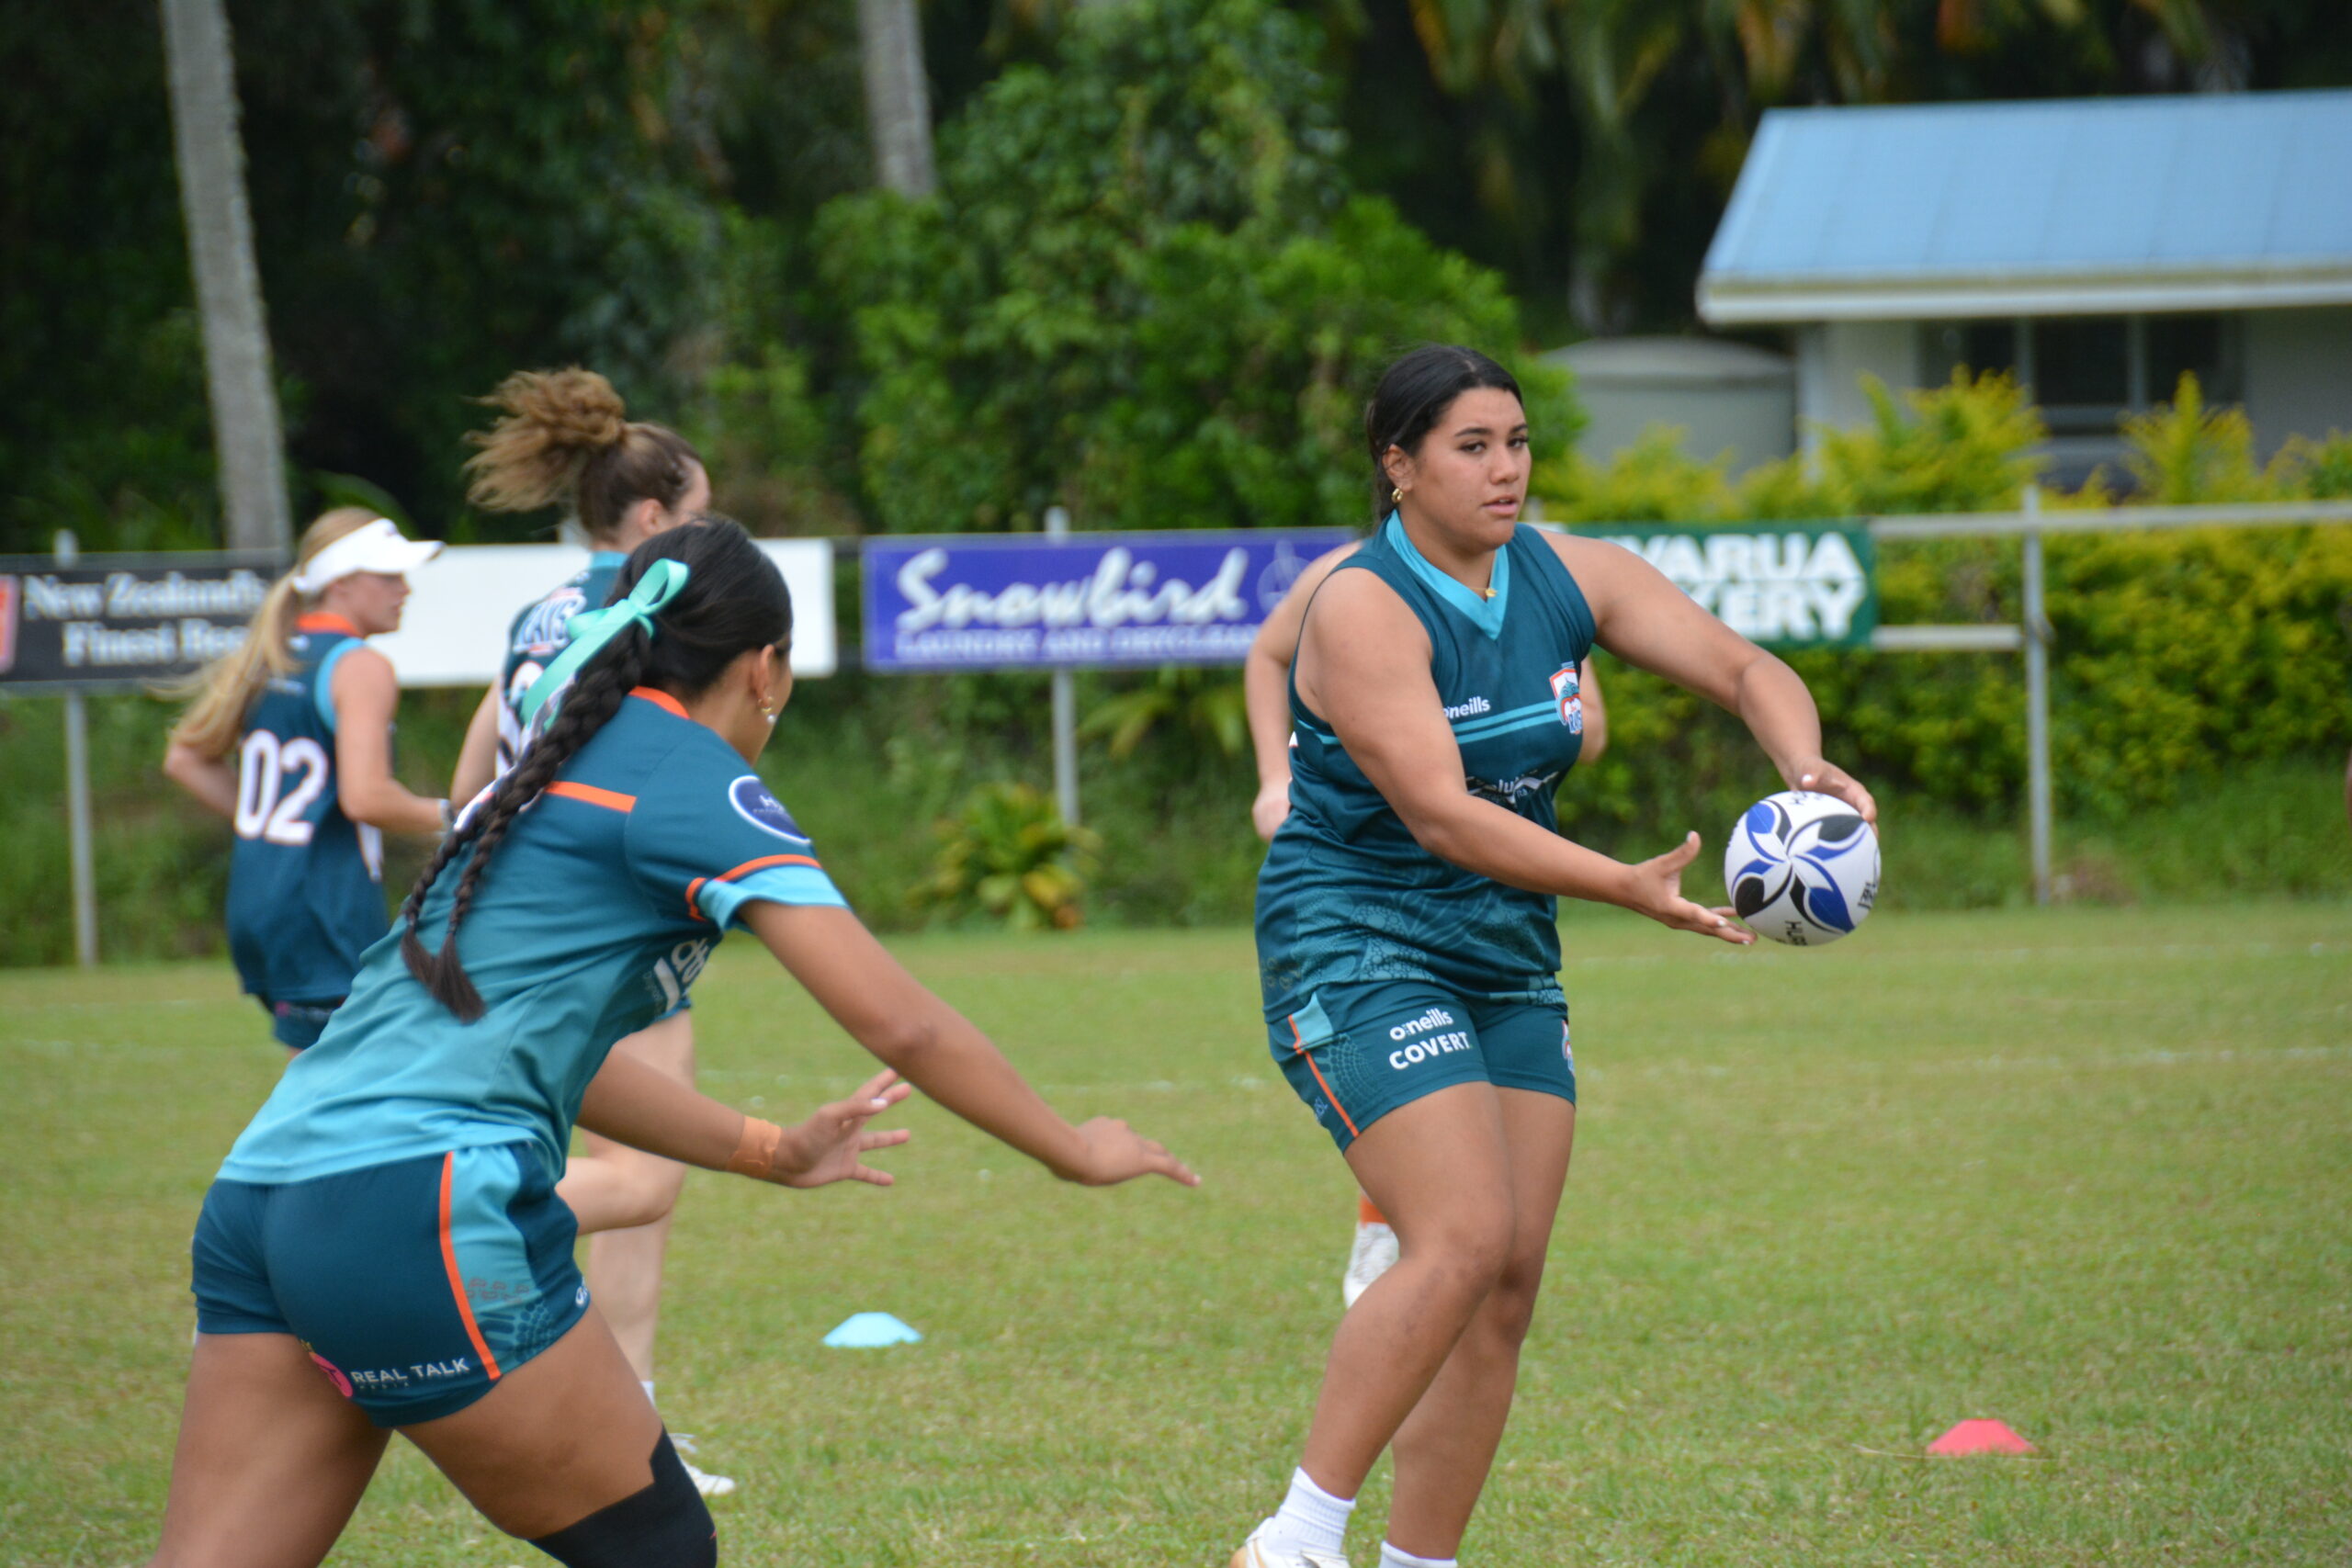 Burra Rays women’s team looks to connect with Pacific heritage at Raro 7s